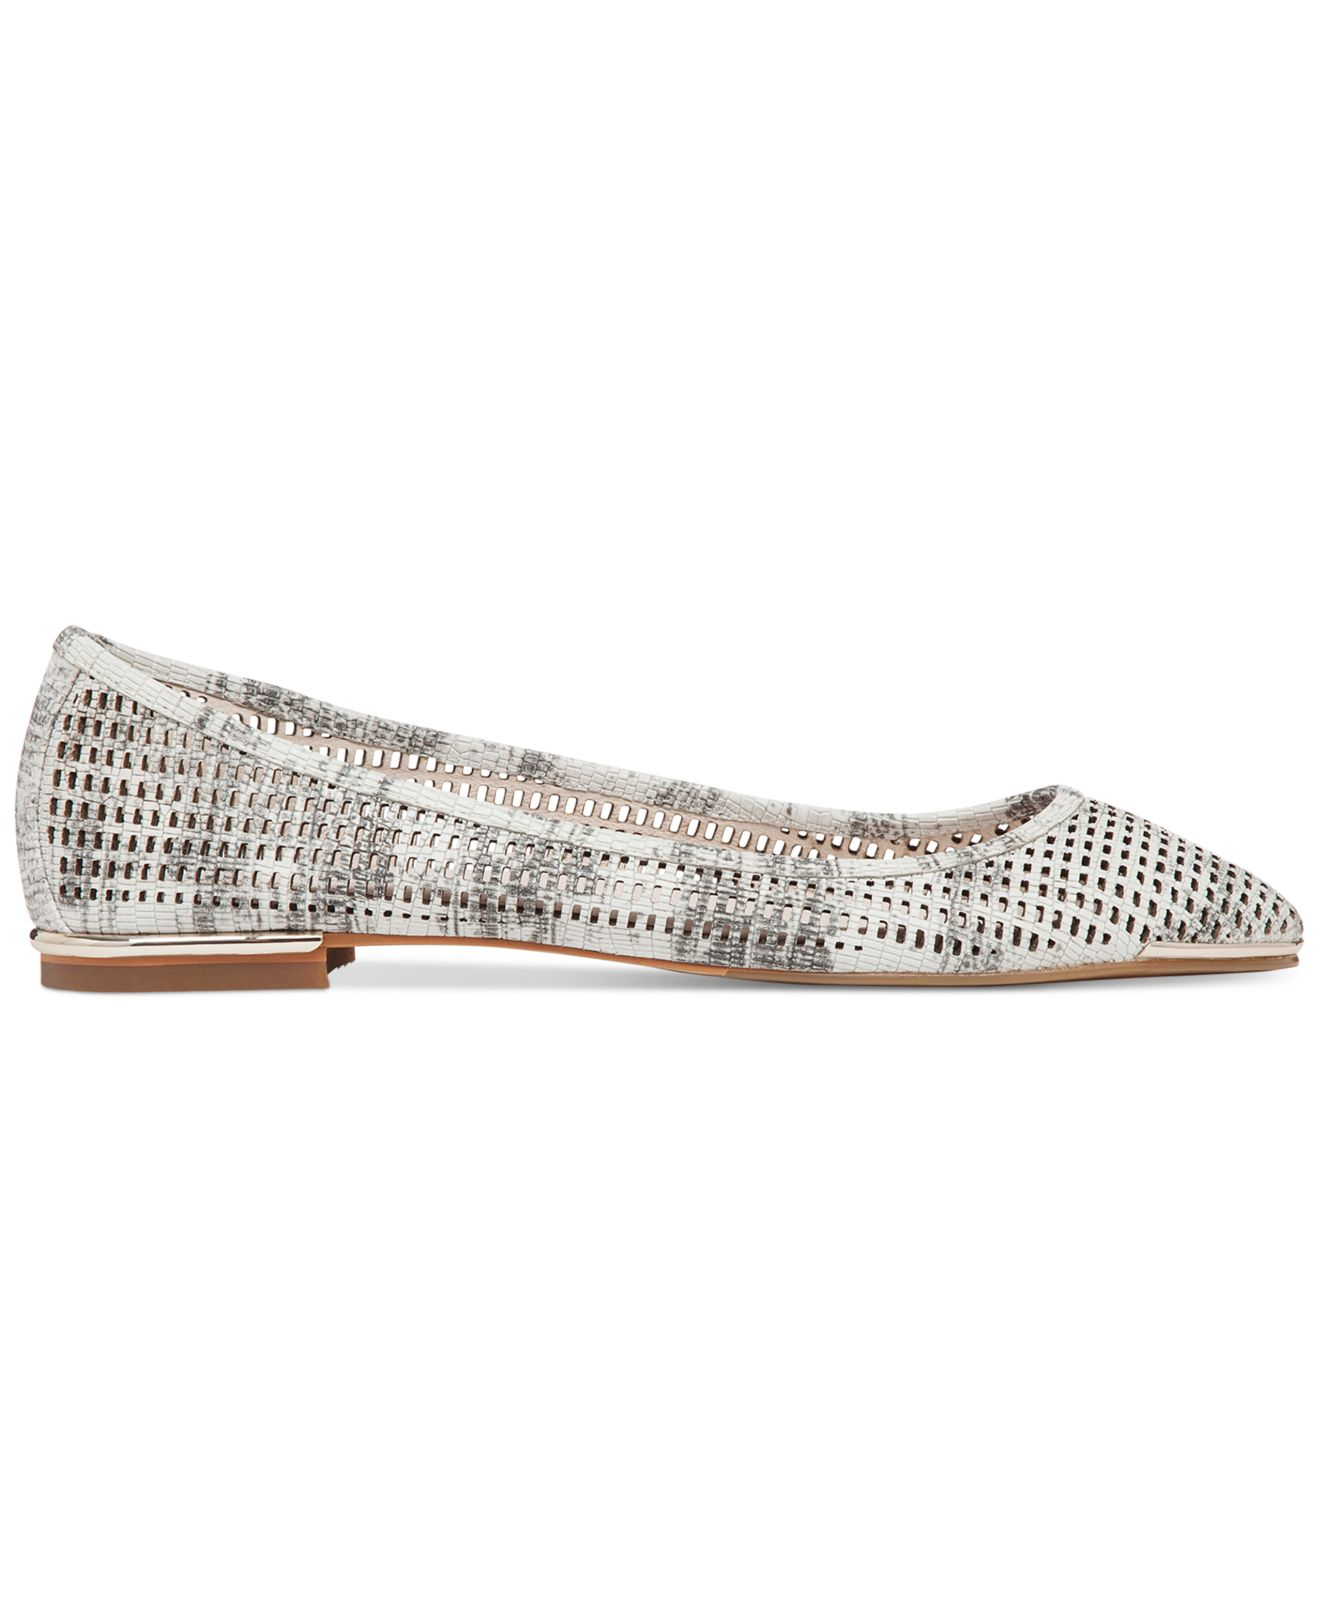 Vince Camuto Caya Flats in Stone (Gray) - Lyst